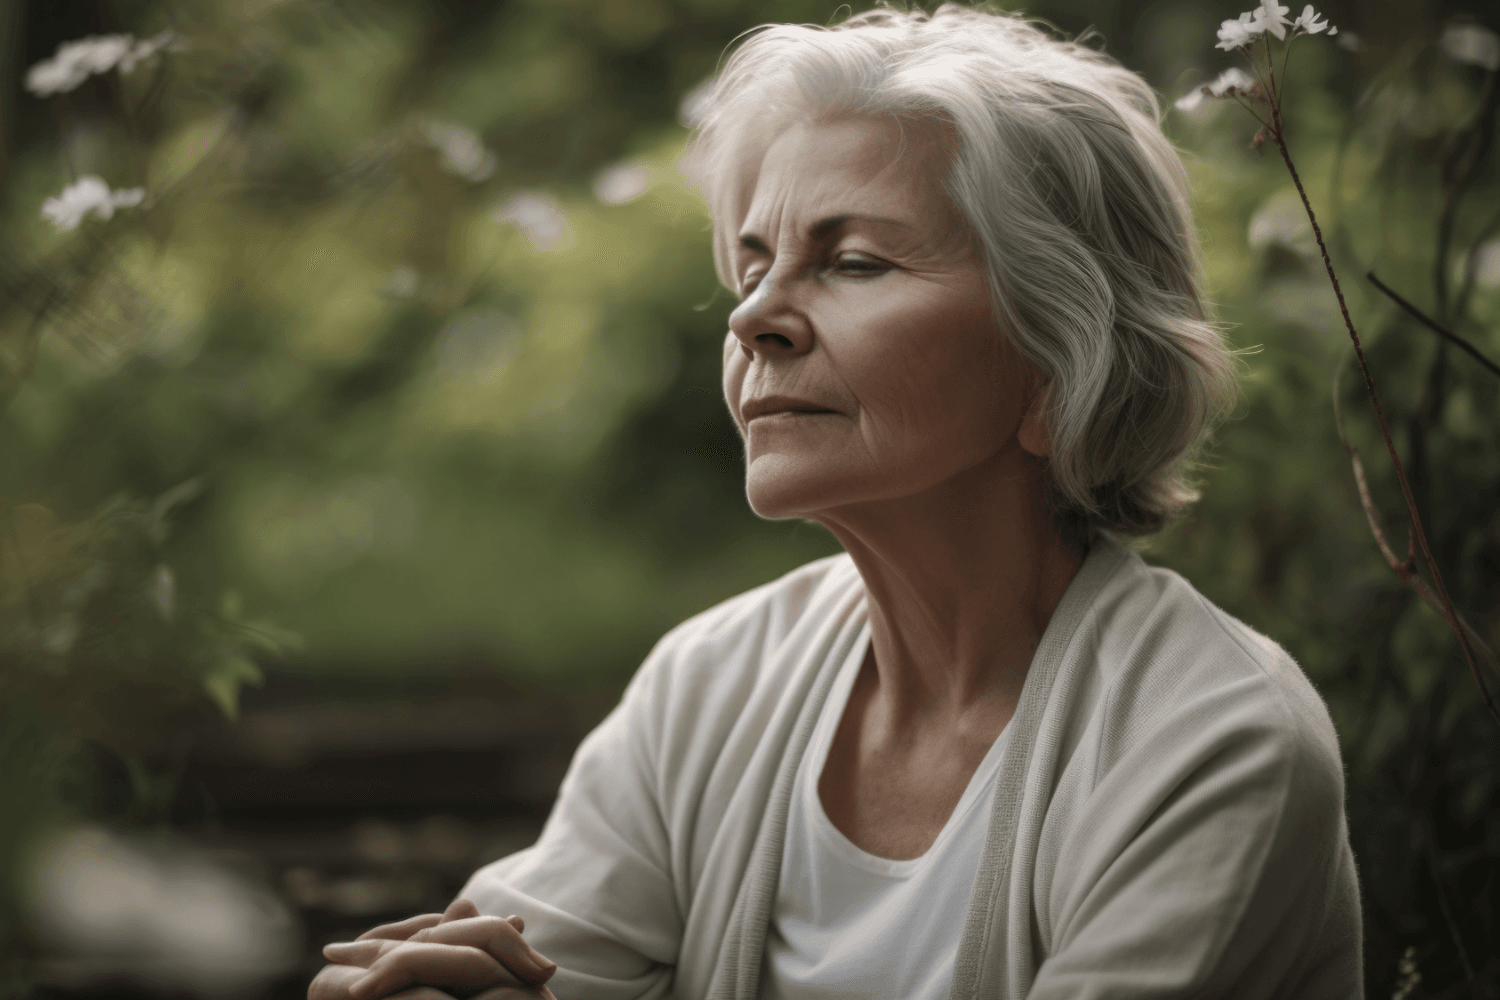 woman with grey hair and cardigan sat outside doing breathing exercises